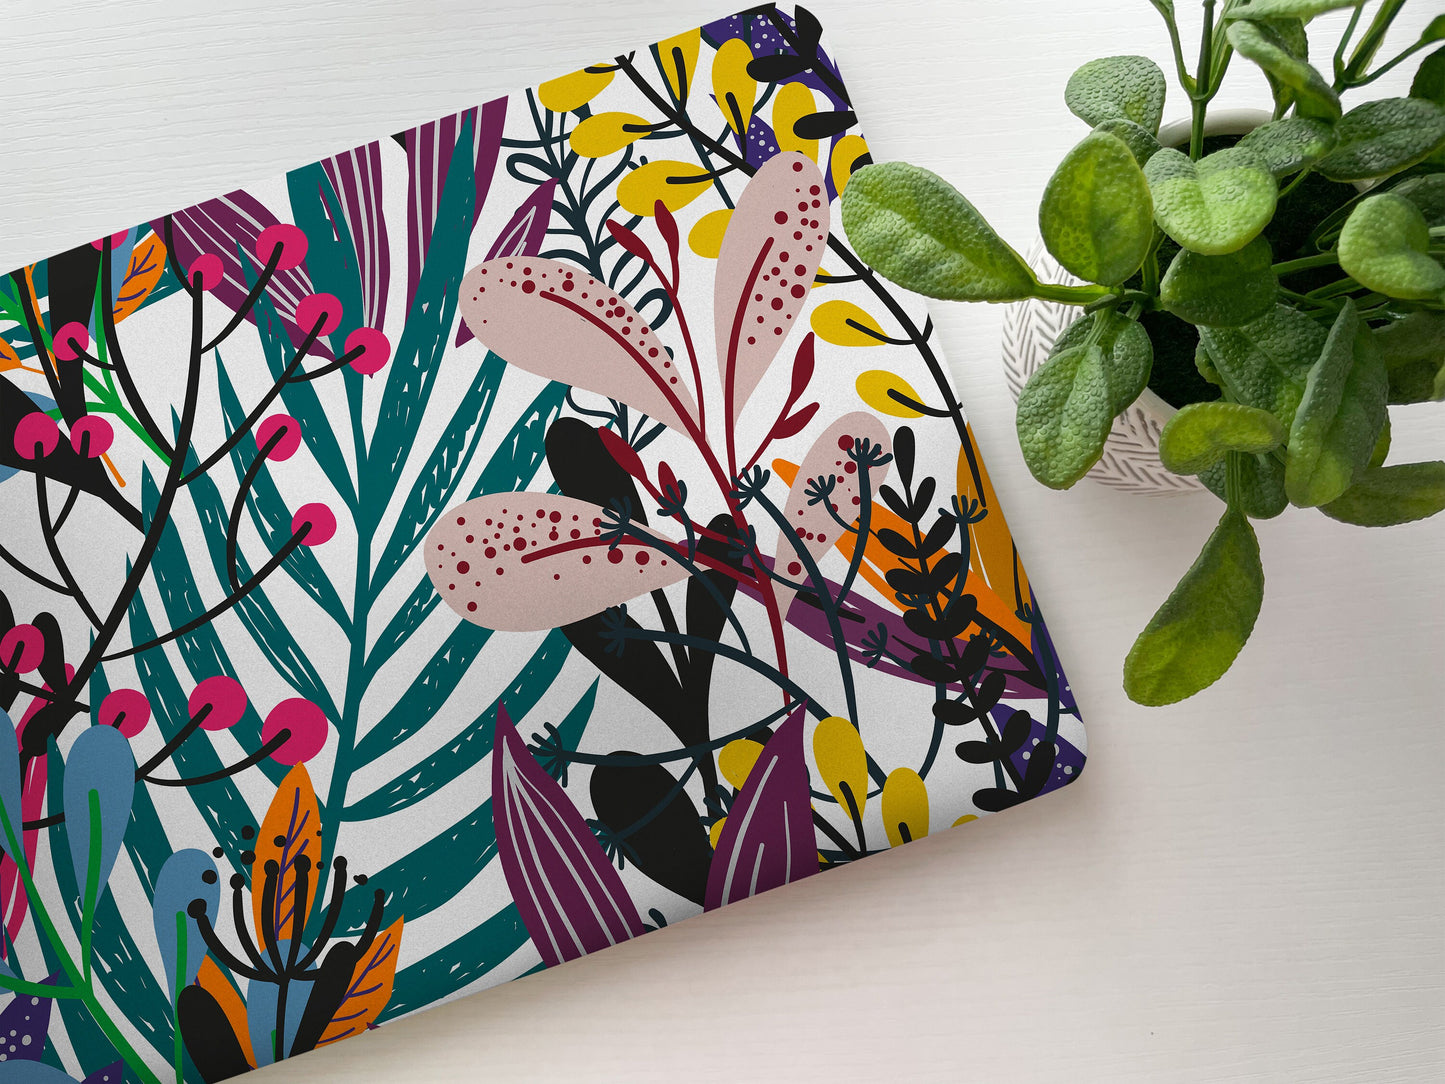 Colorful Floral Laptop Skin, Laptop Cover, Laptop Skins, Removable Laptop Skins, Laptop Decal, Customized Laptop, Laptop Stickers 66 - James & Inks